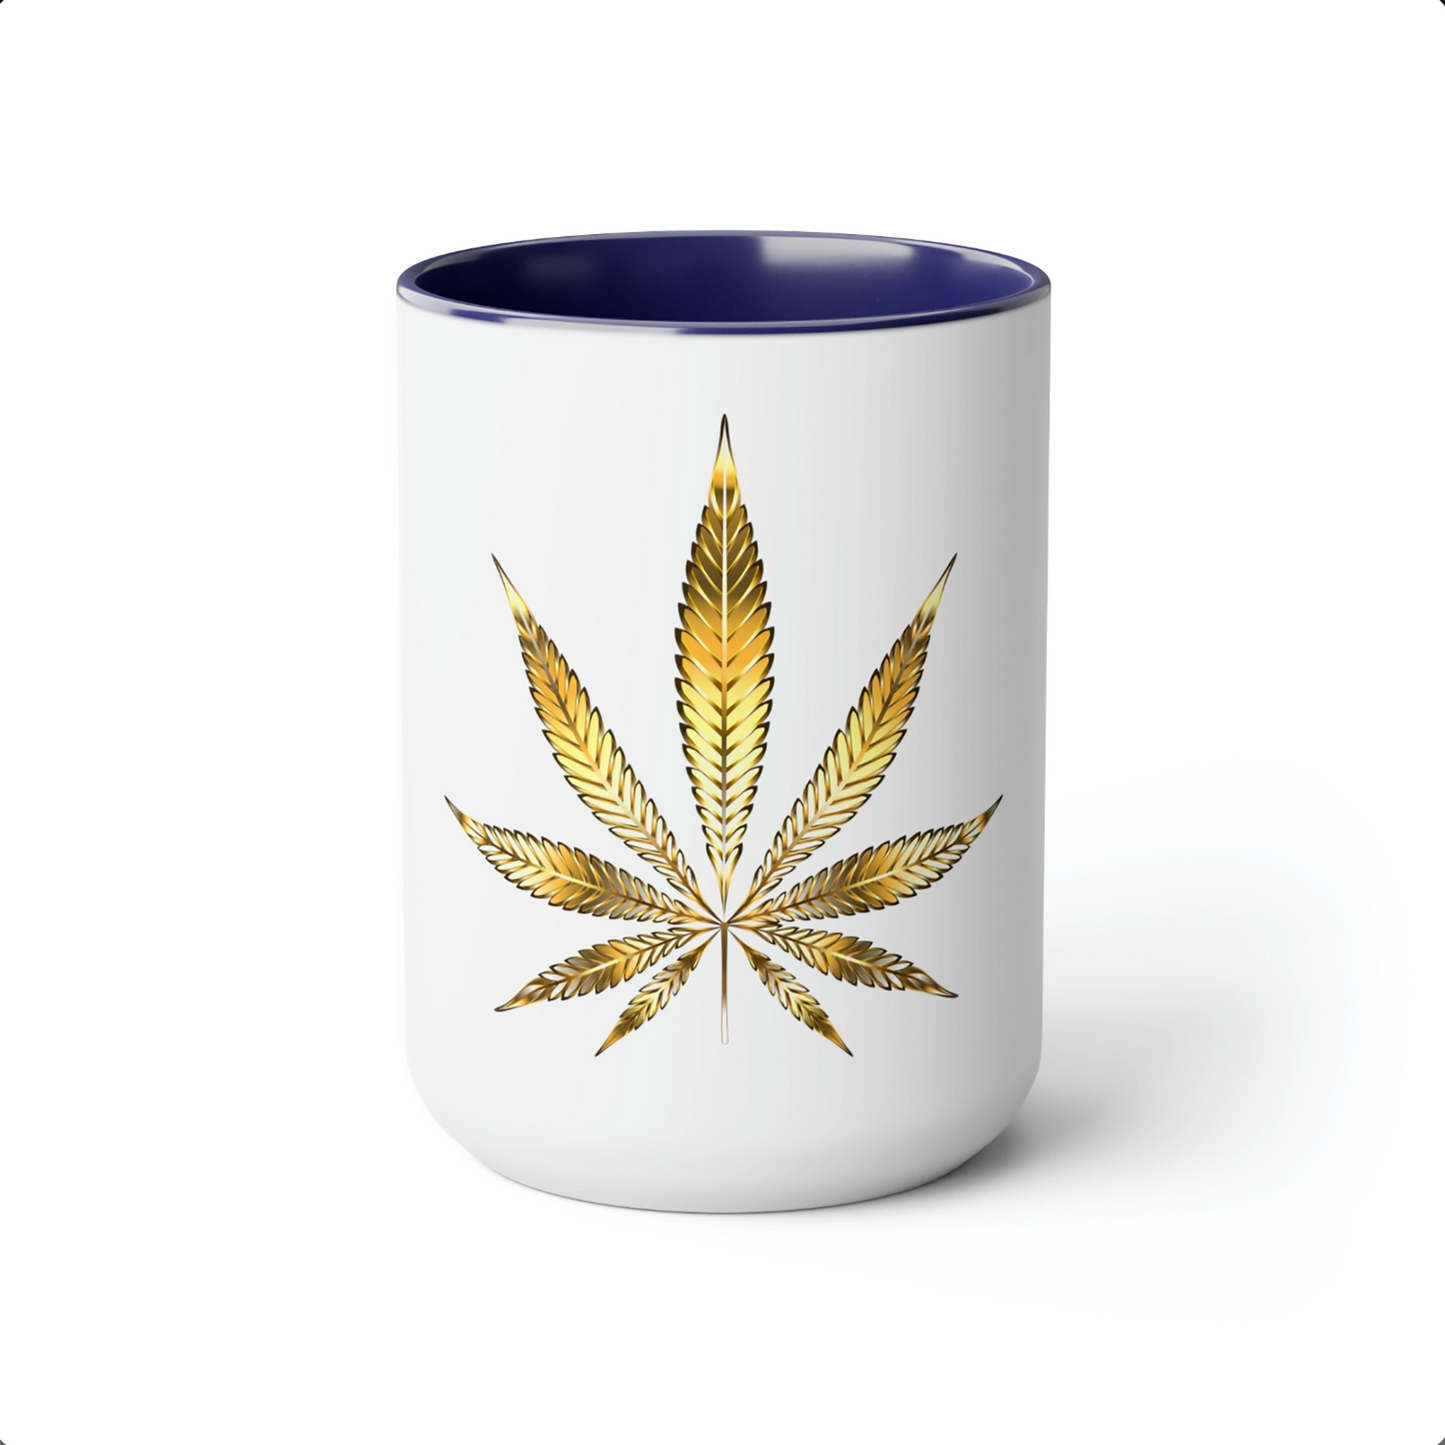 A white cannabis mug with a navy blue interior featuring a bright gold weed leaf on the front center.